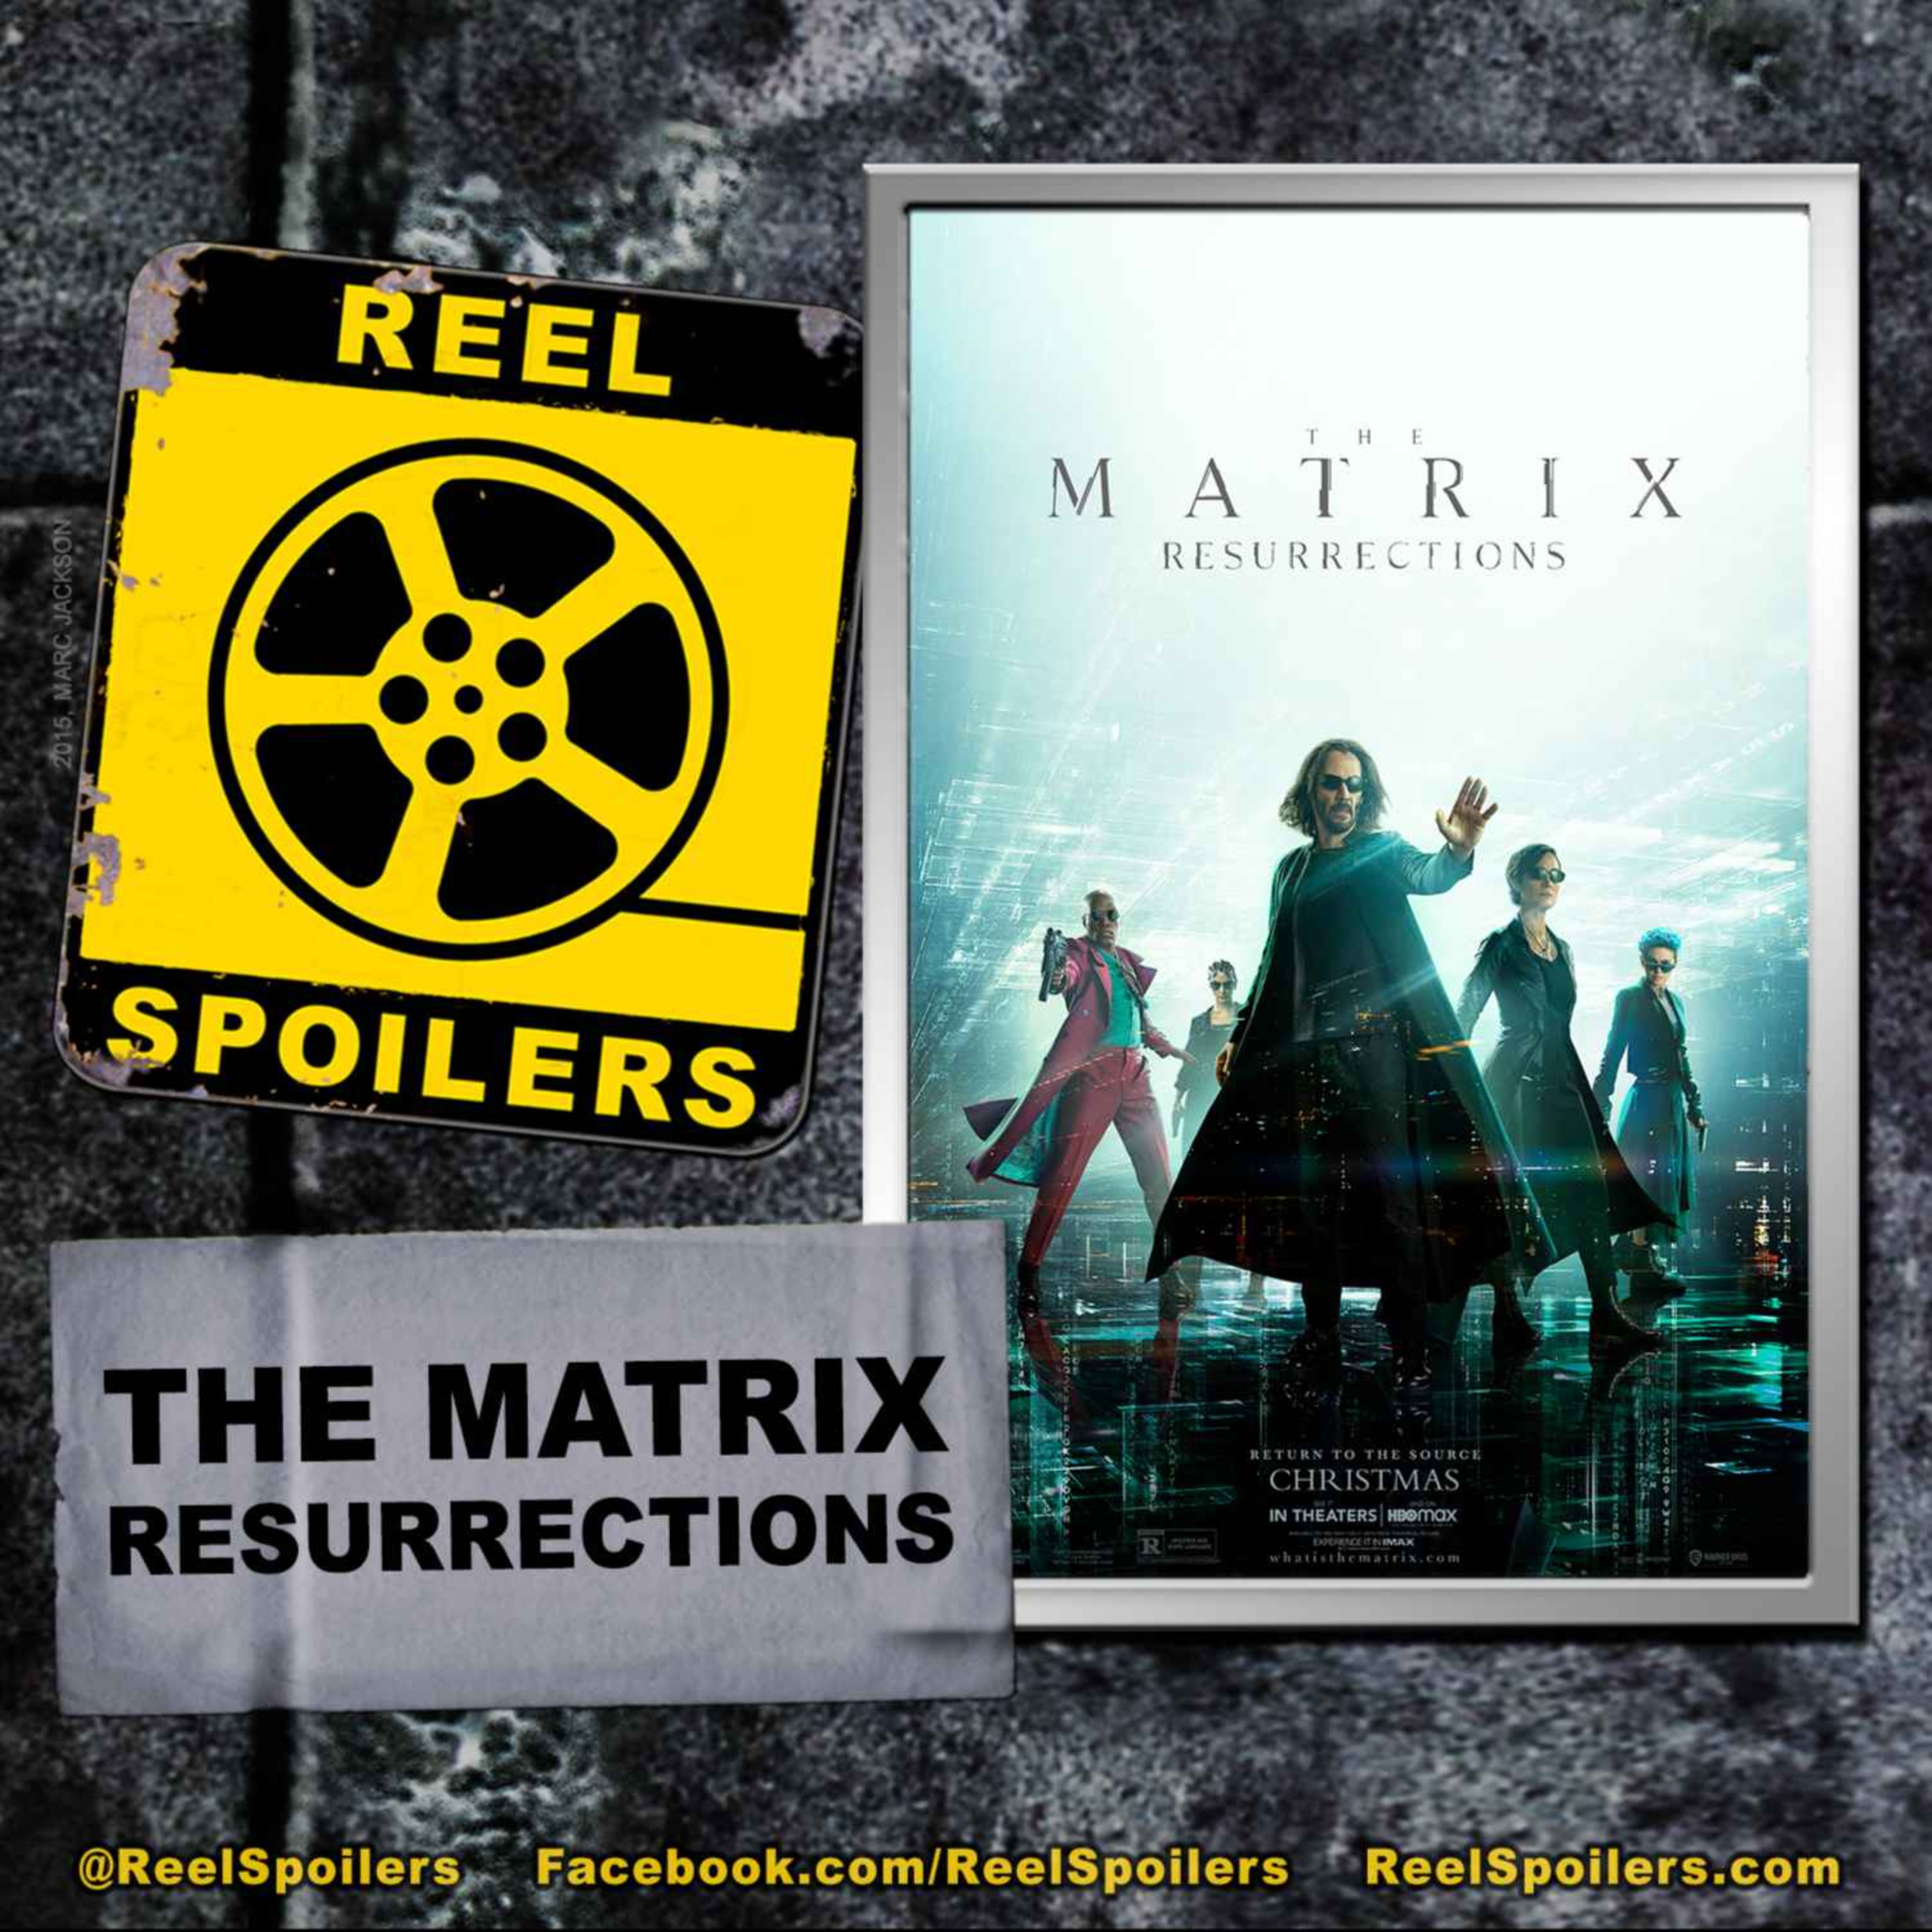 THE MATRIX RESURRECTIONS Starring Keanu Reeves, Carrie-Anne Moss, Jessica Henwick Image